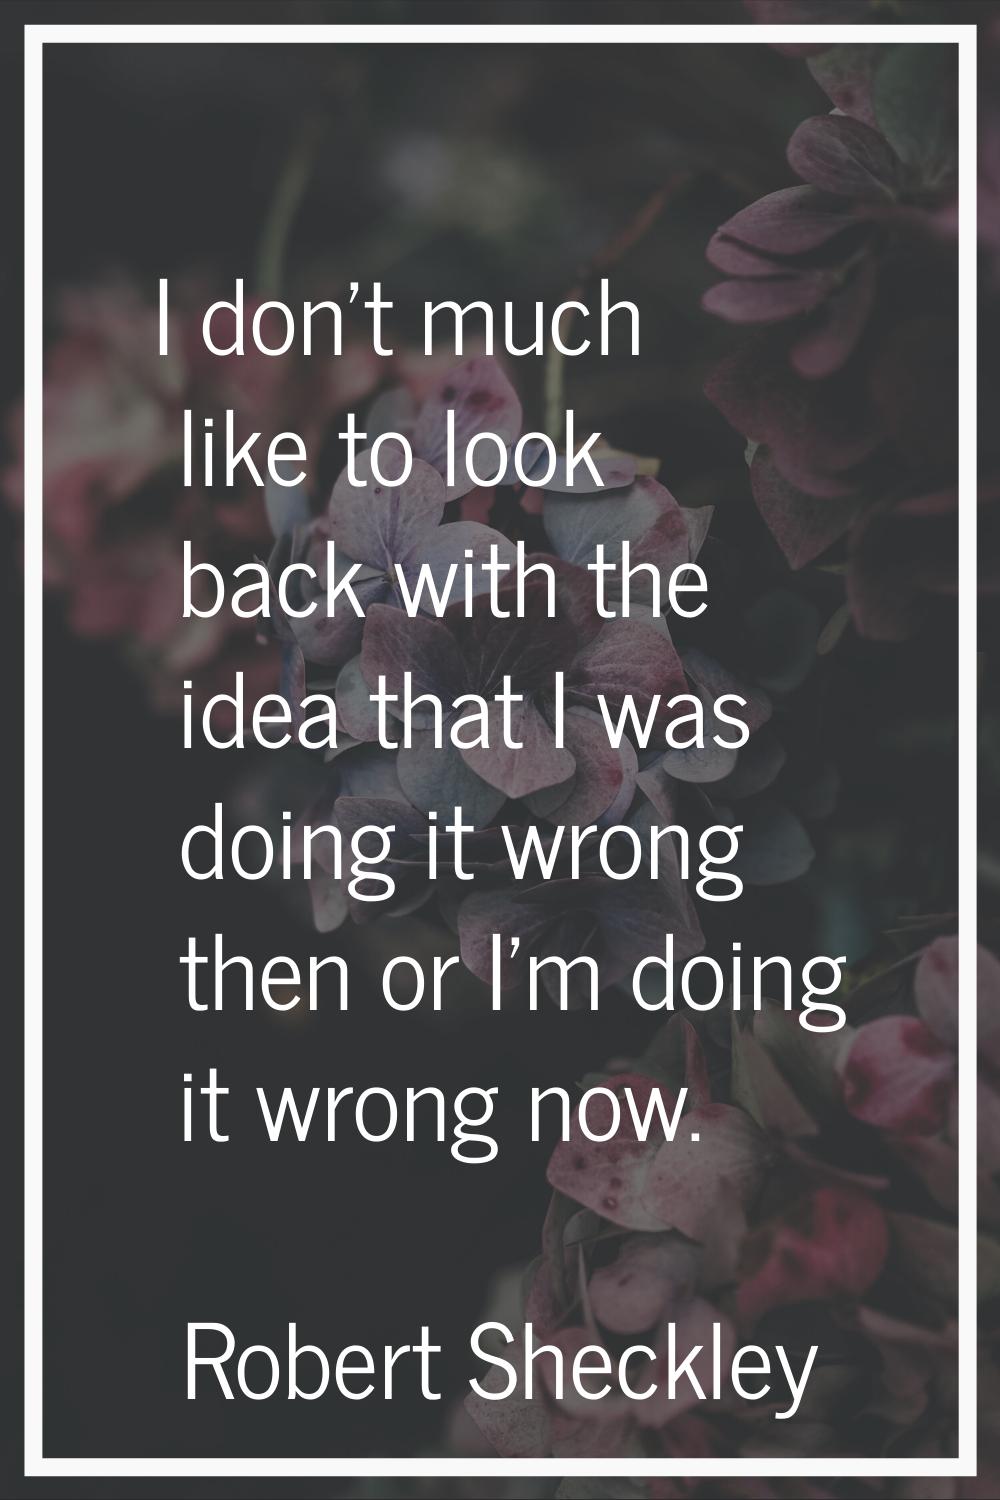 I don't much like to look back with the idea that I was doing it wrong then or I'm doing it wrong n